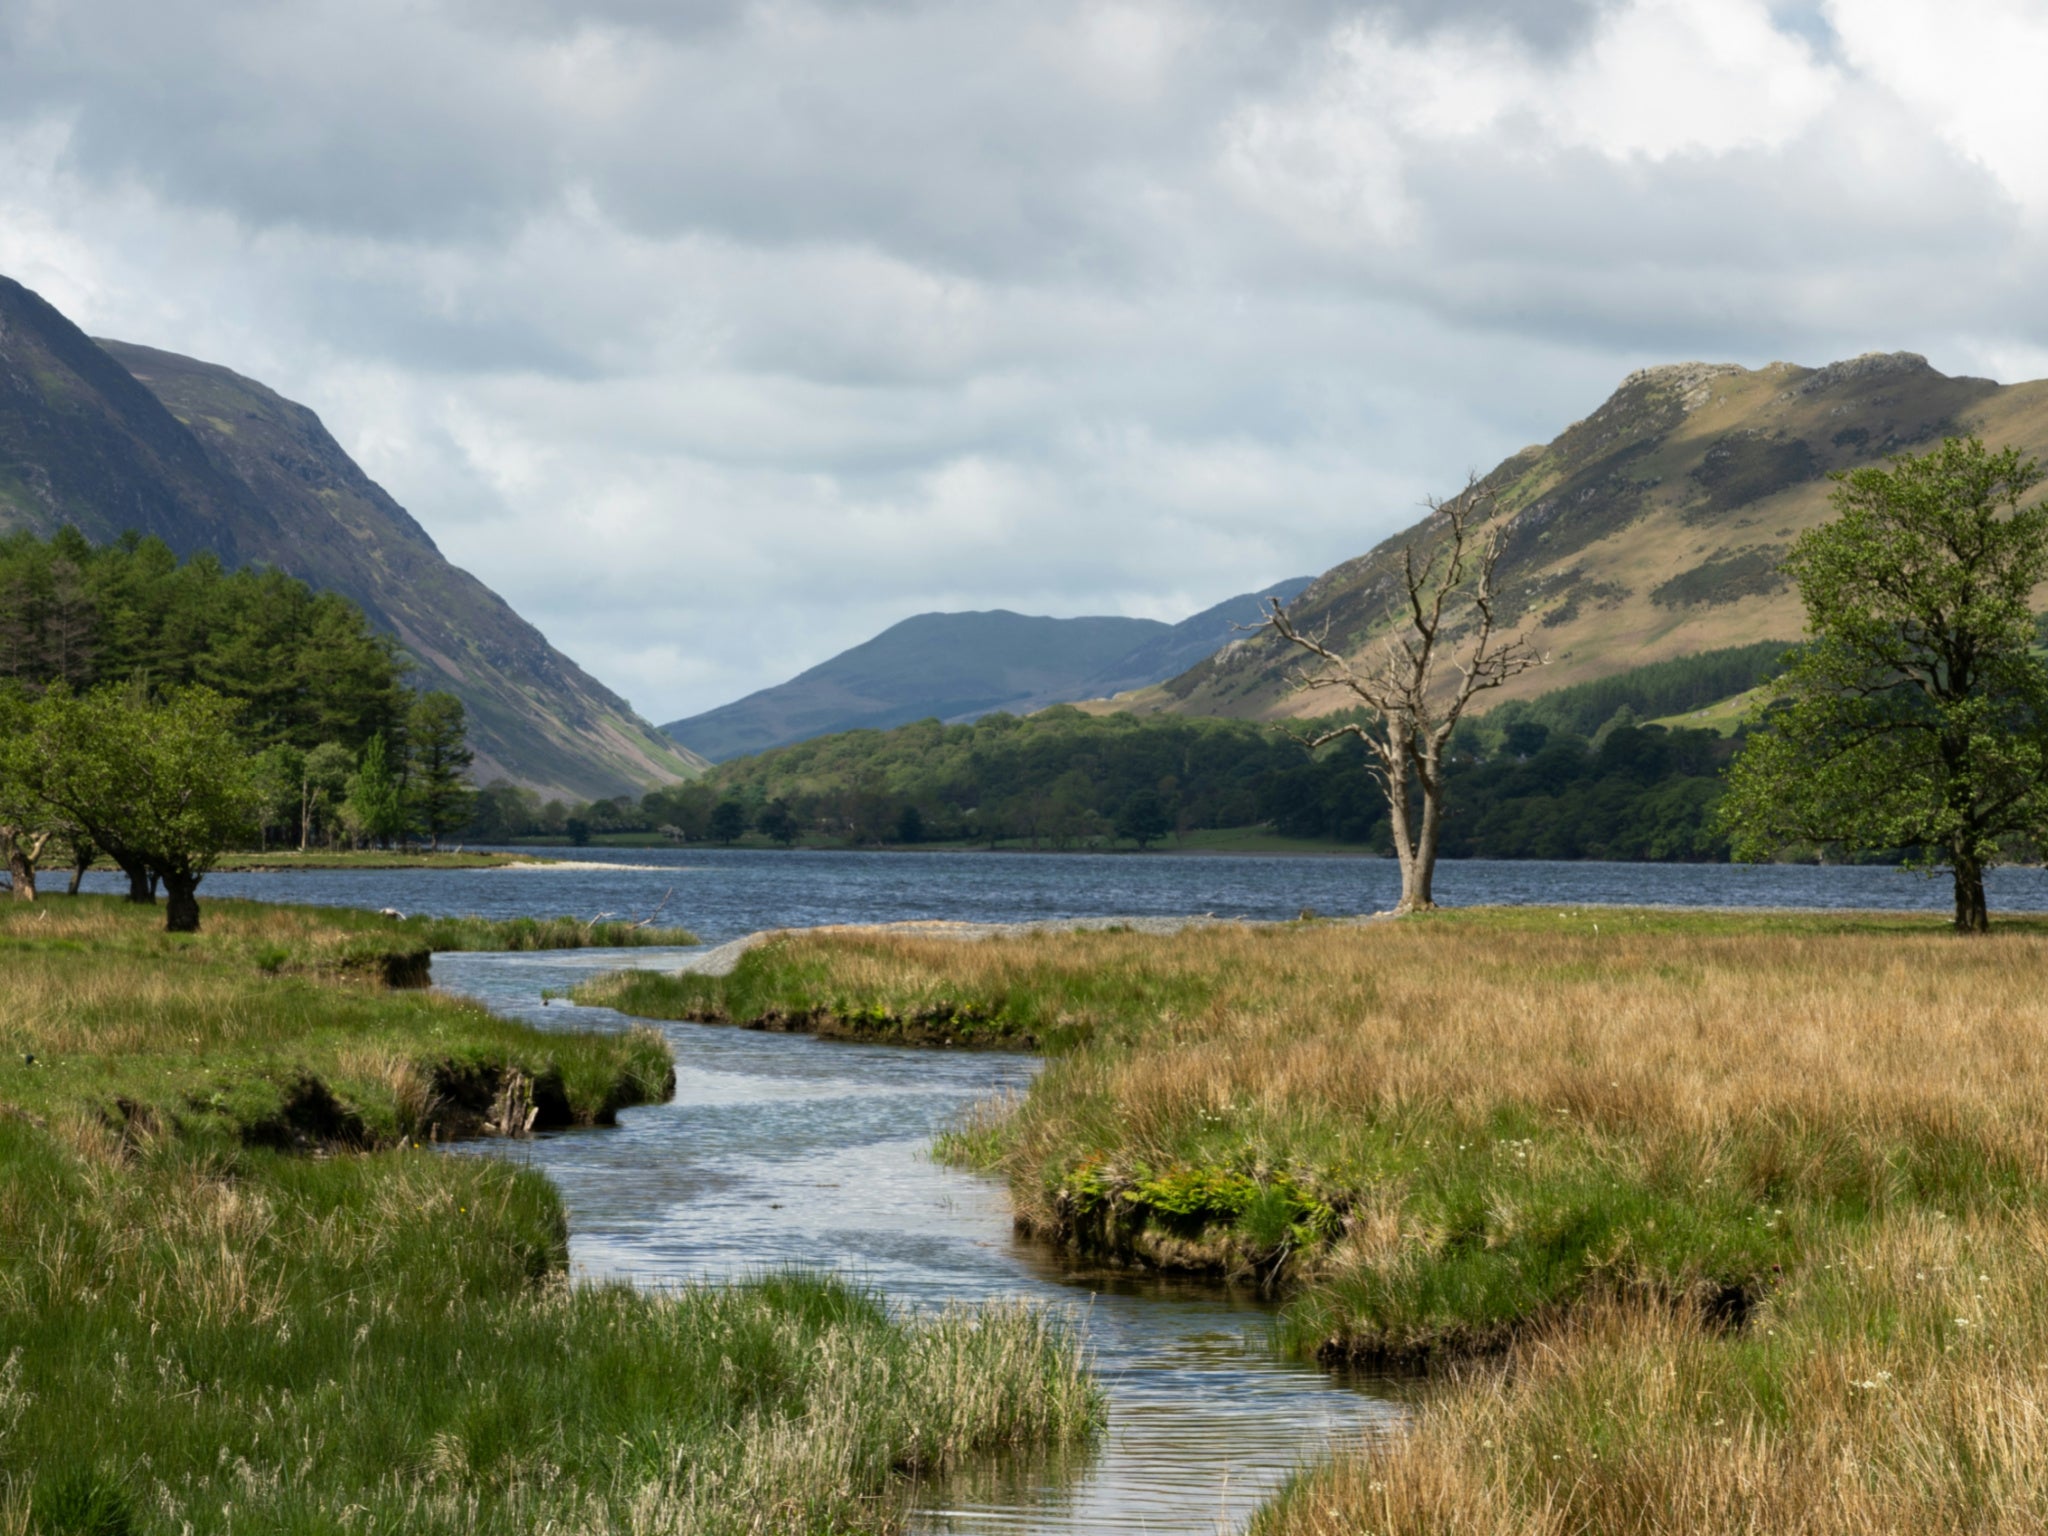 One of the Lake District’s best walks starts at Buttermere